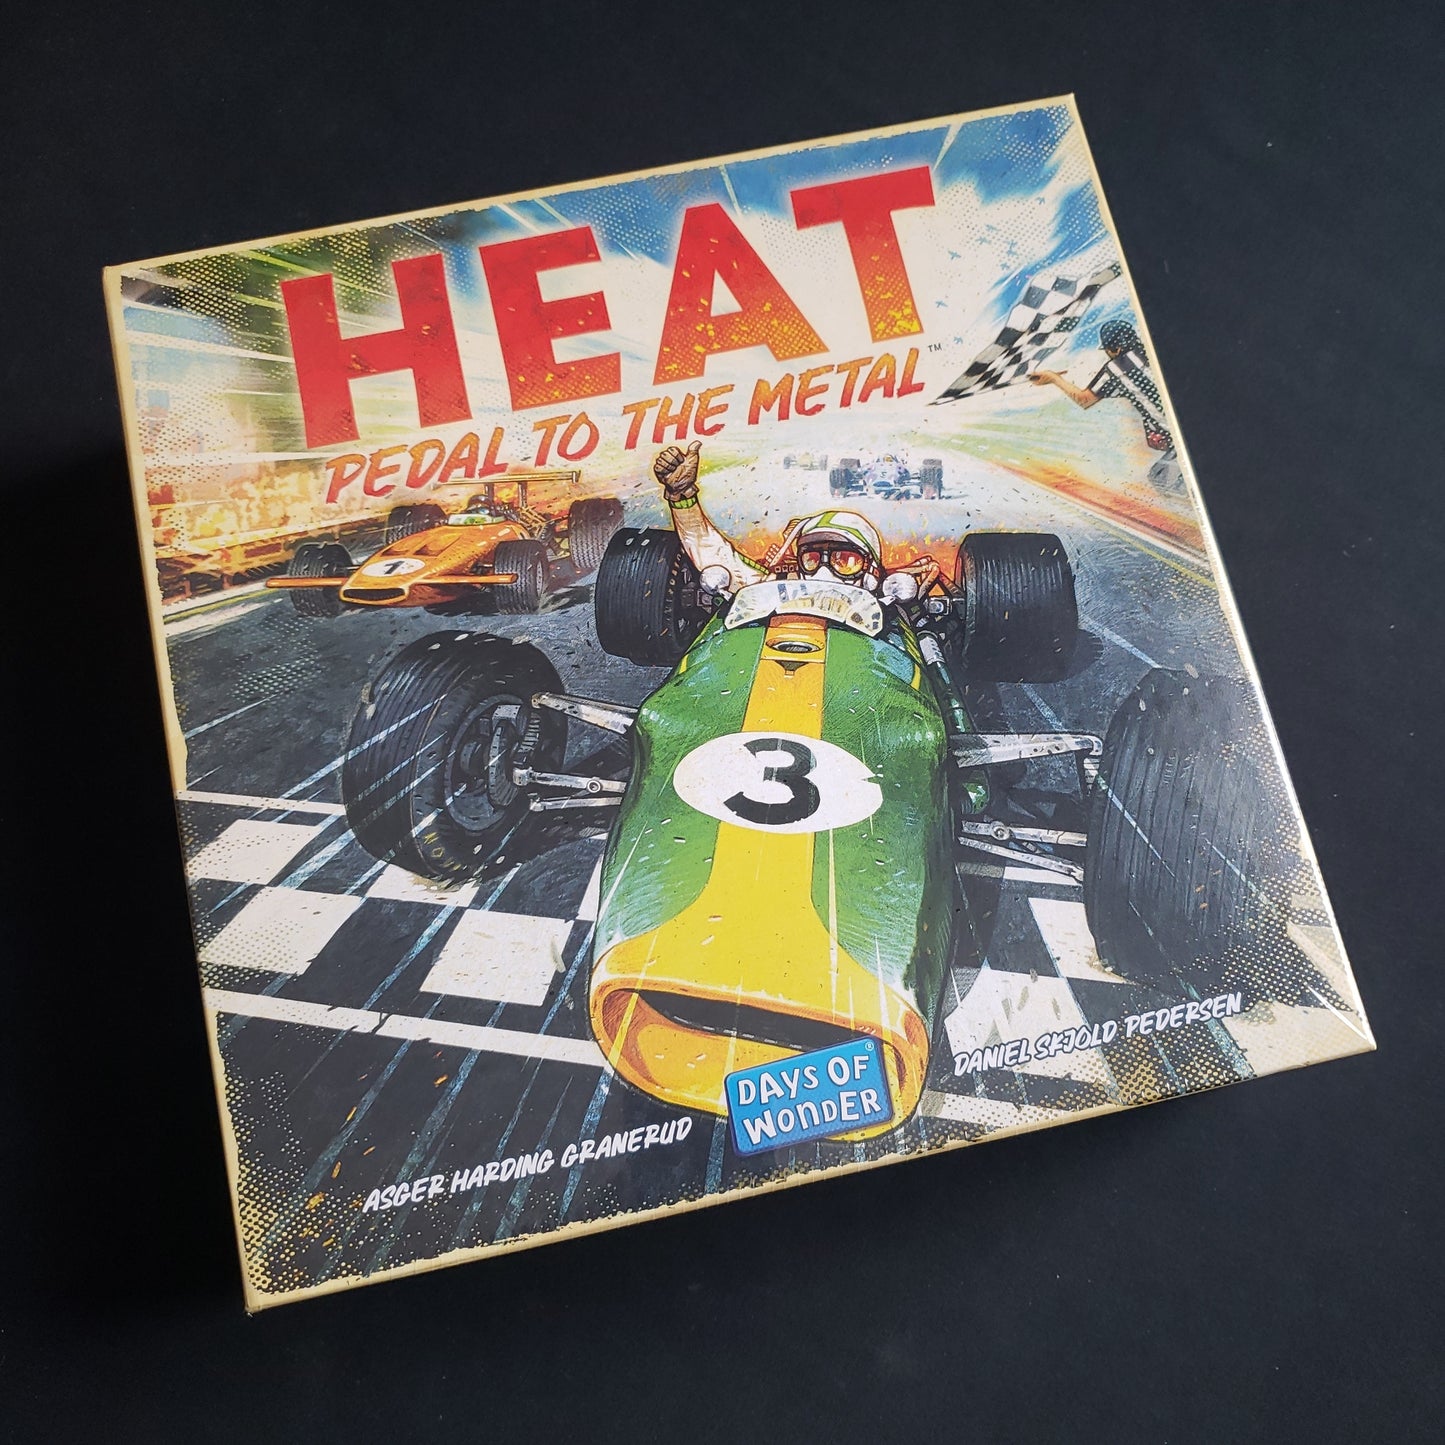 Image shows the front cover of the box of the Heat: Pedal to the Metal board game